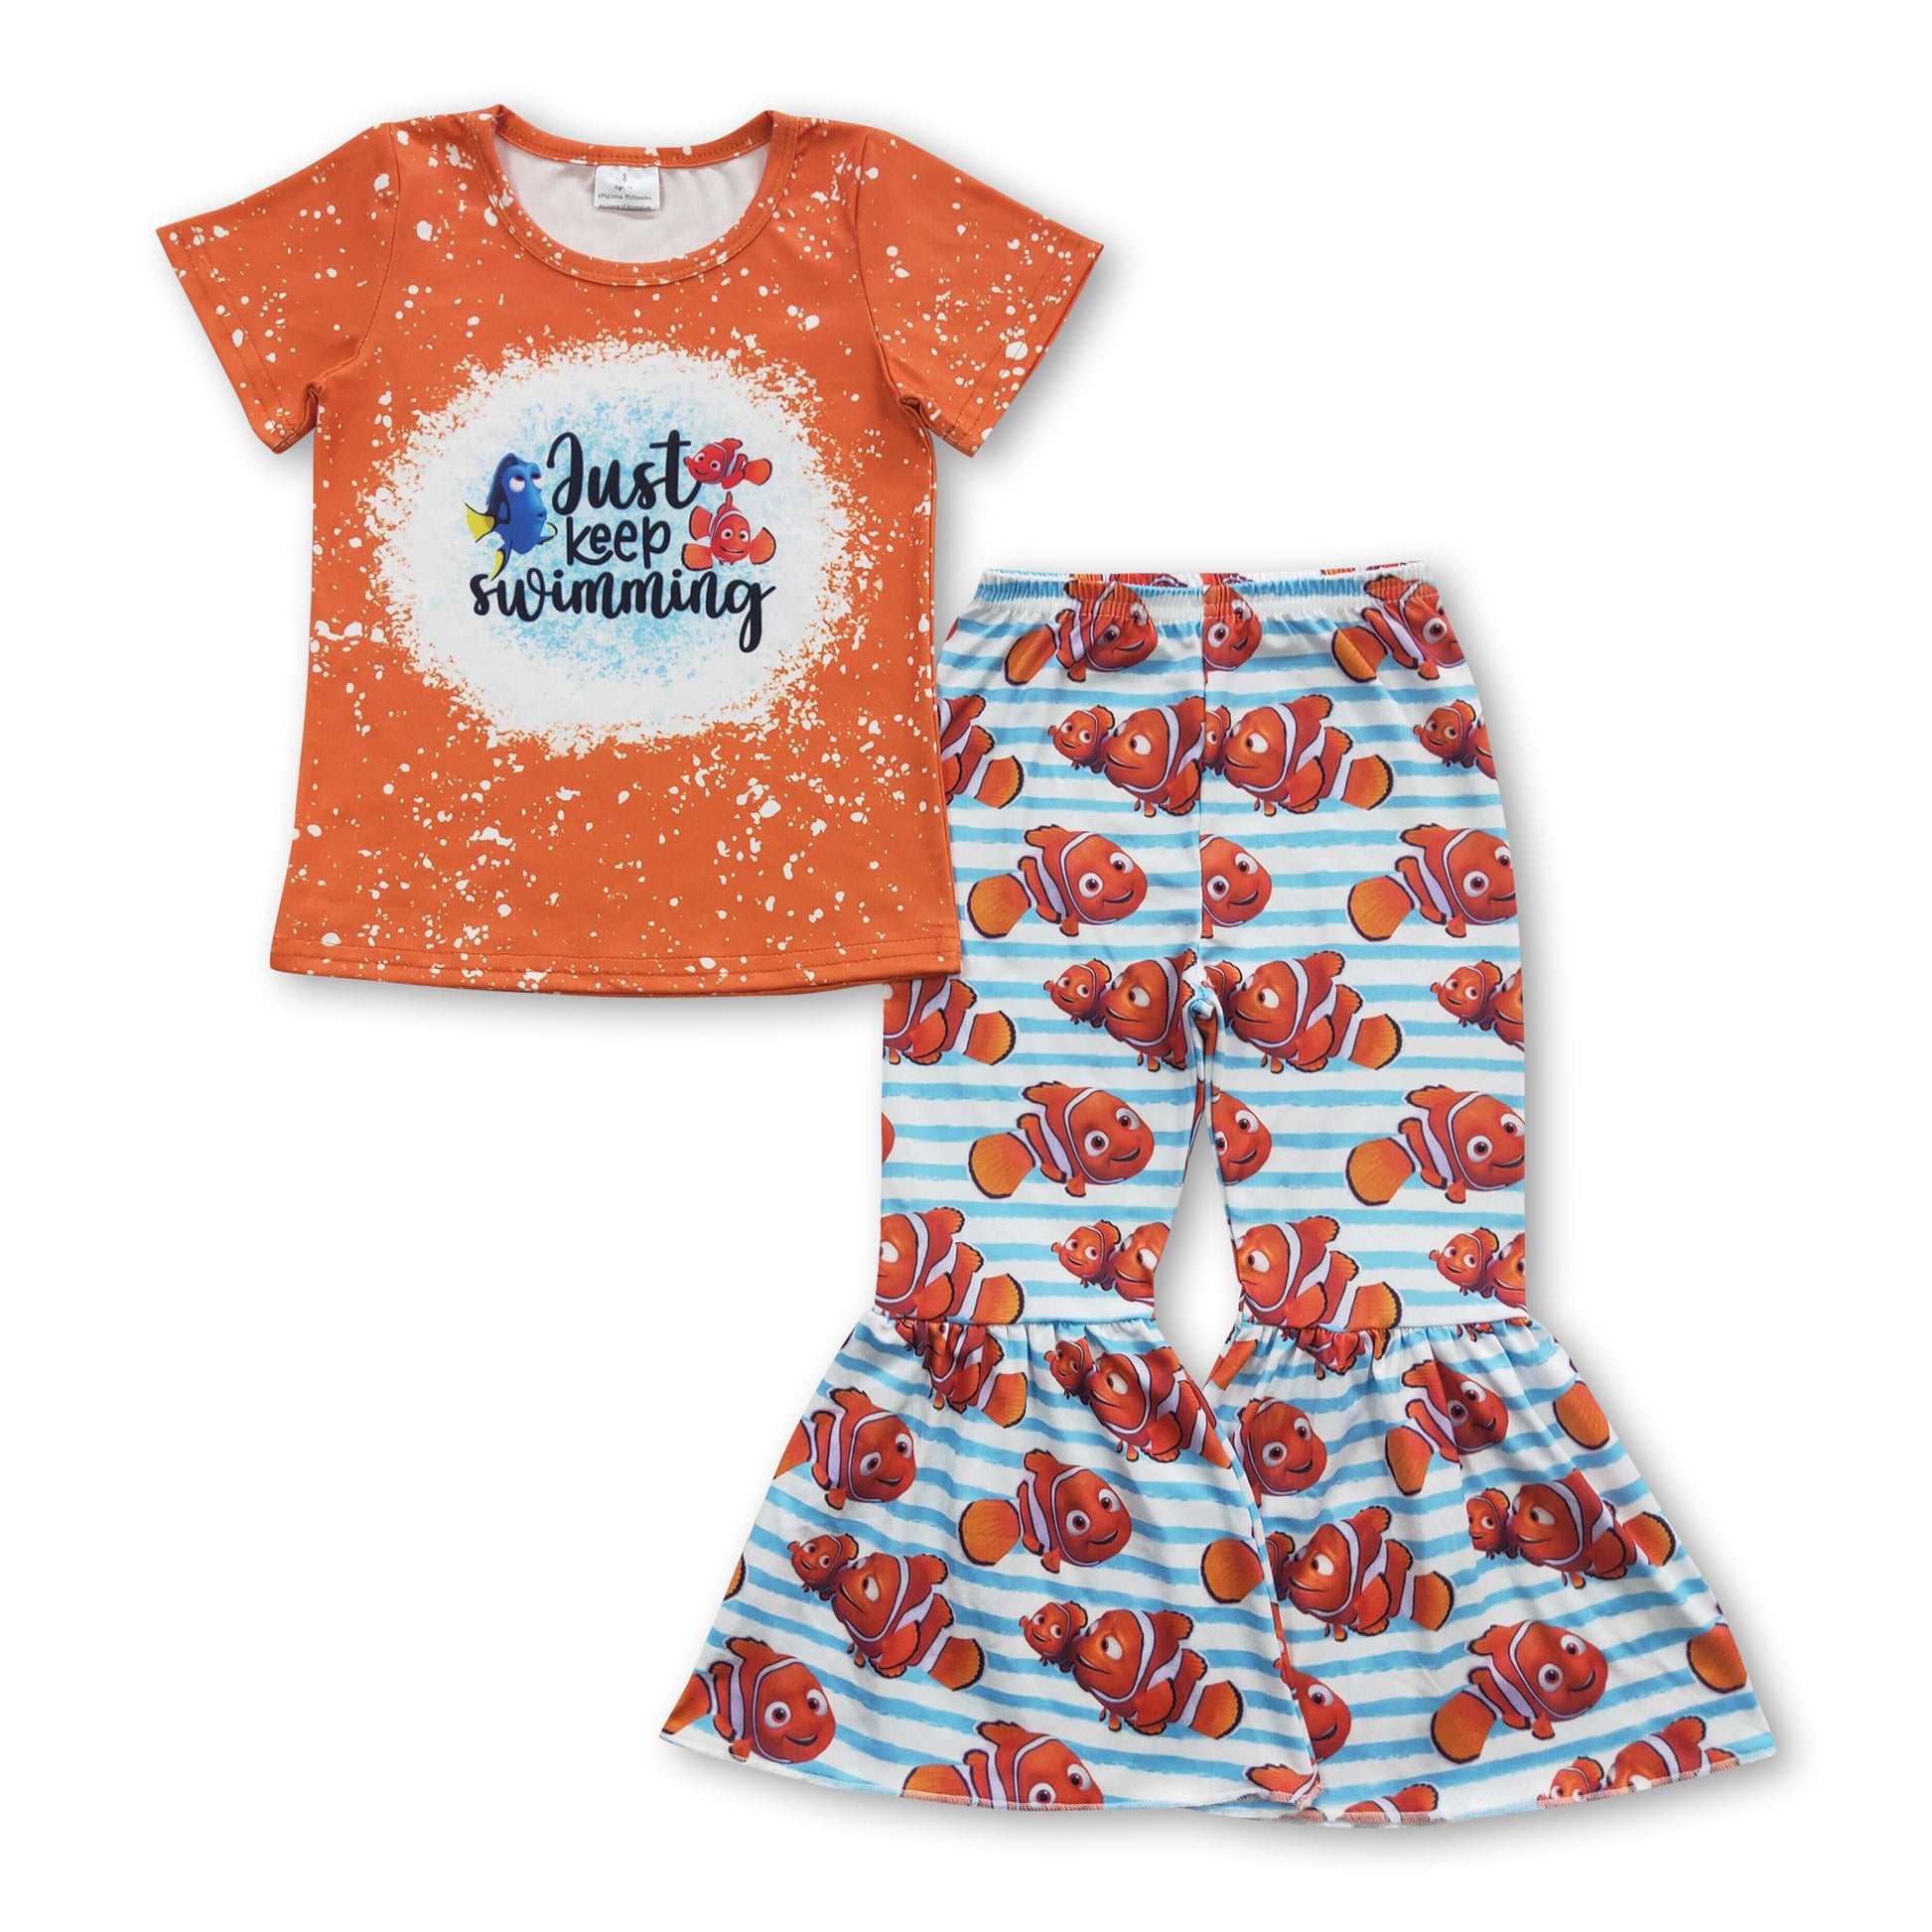 Just keep swimming fish pants girls clothing set – Western kids clothes